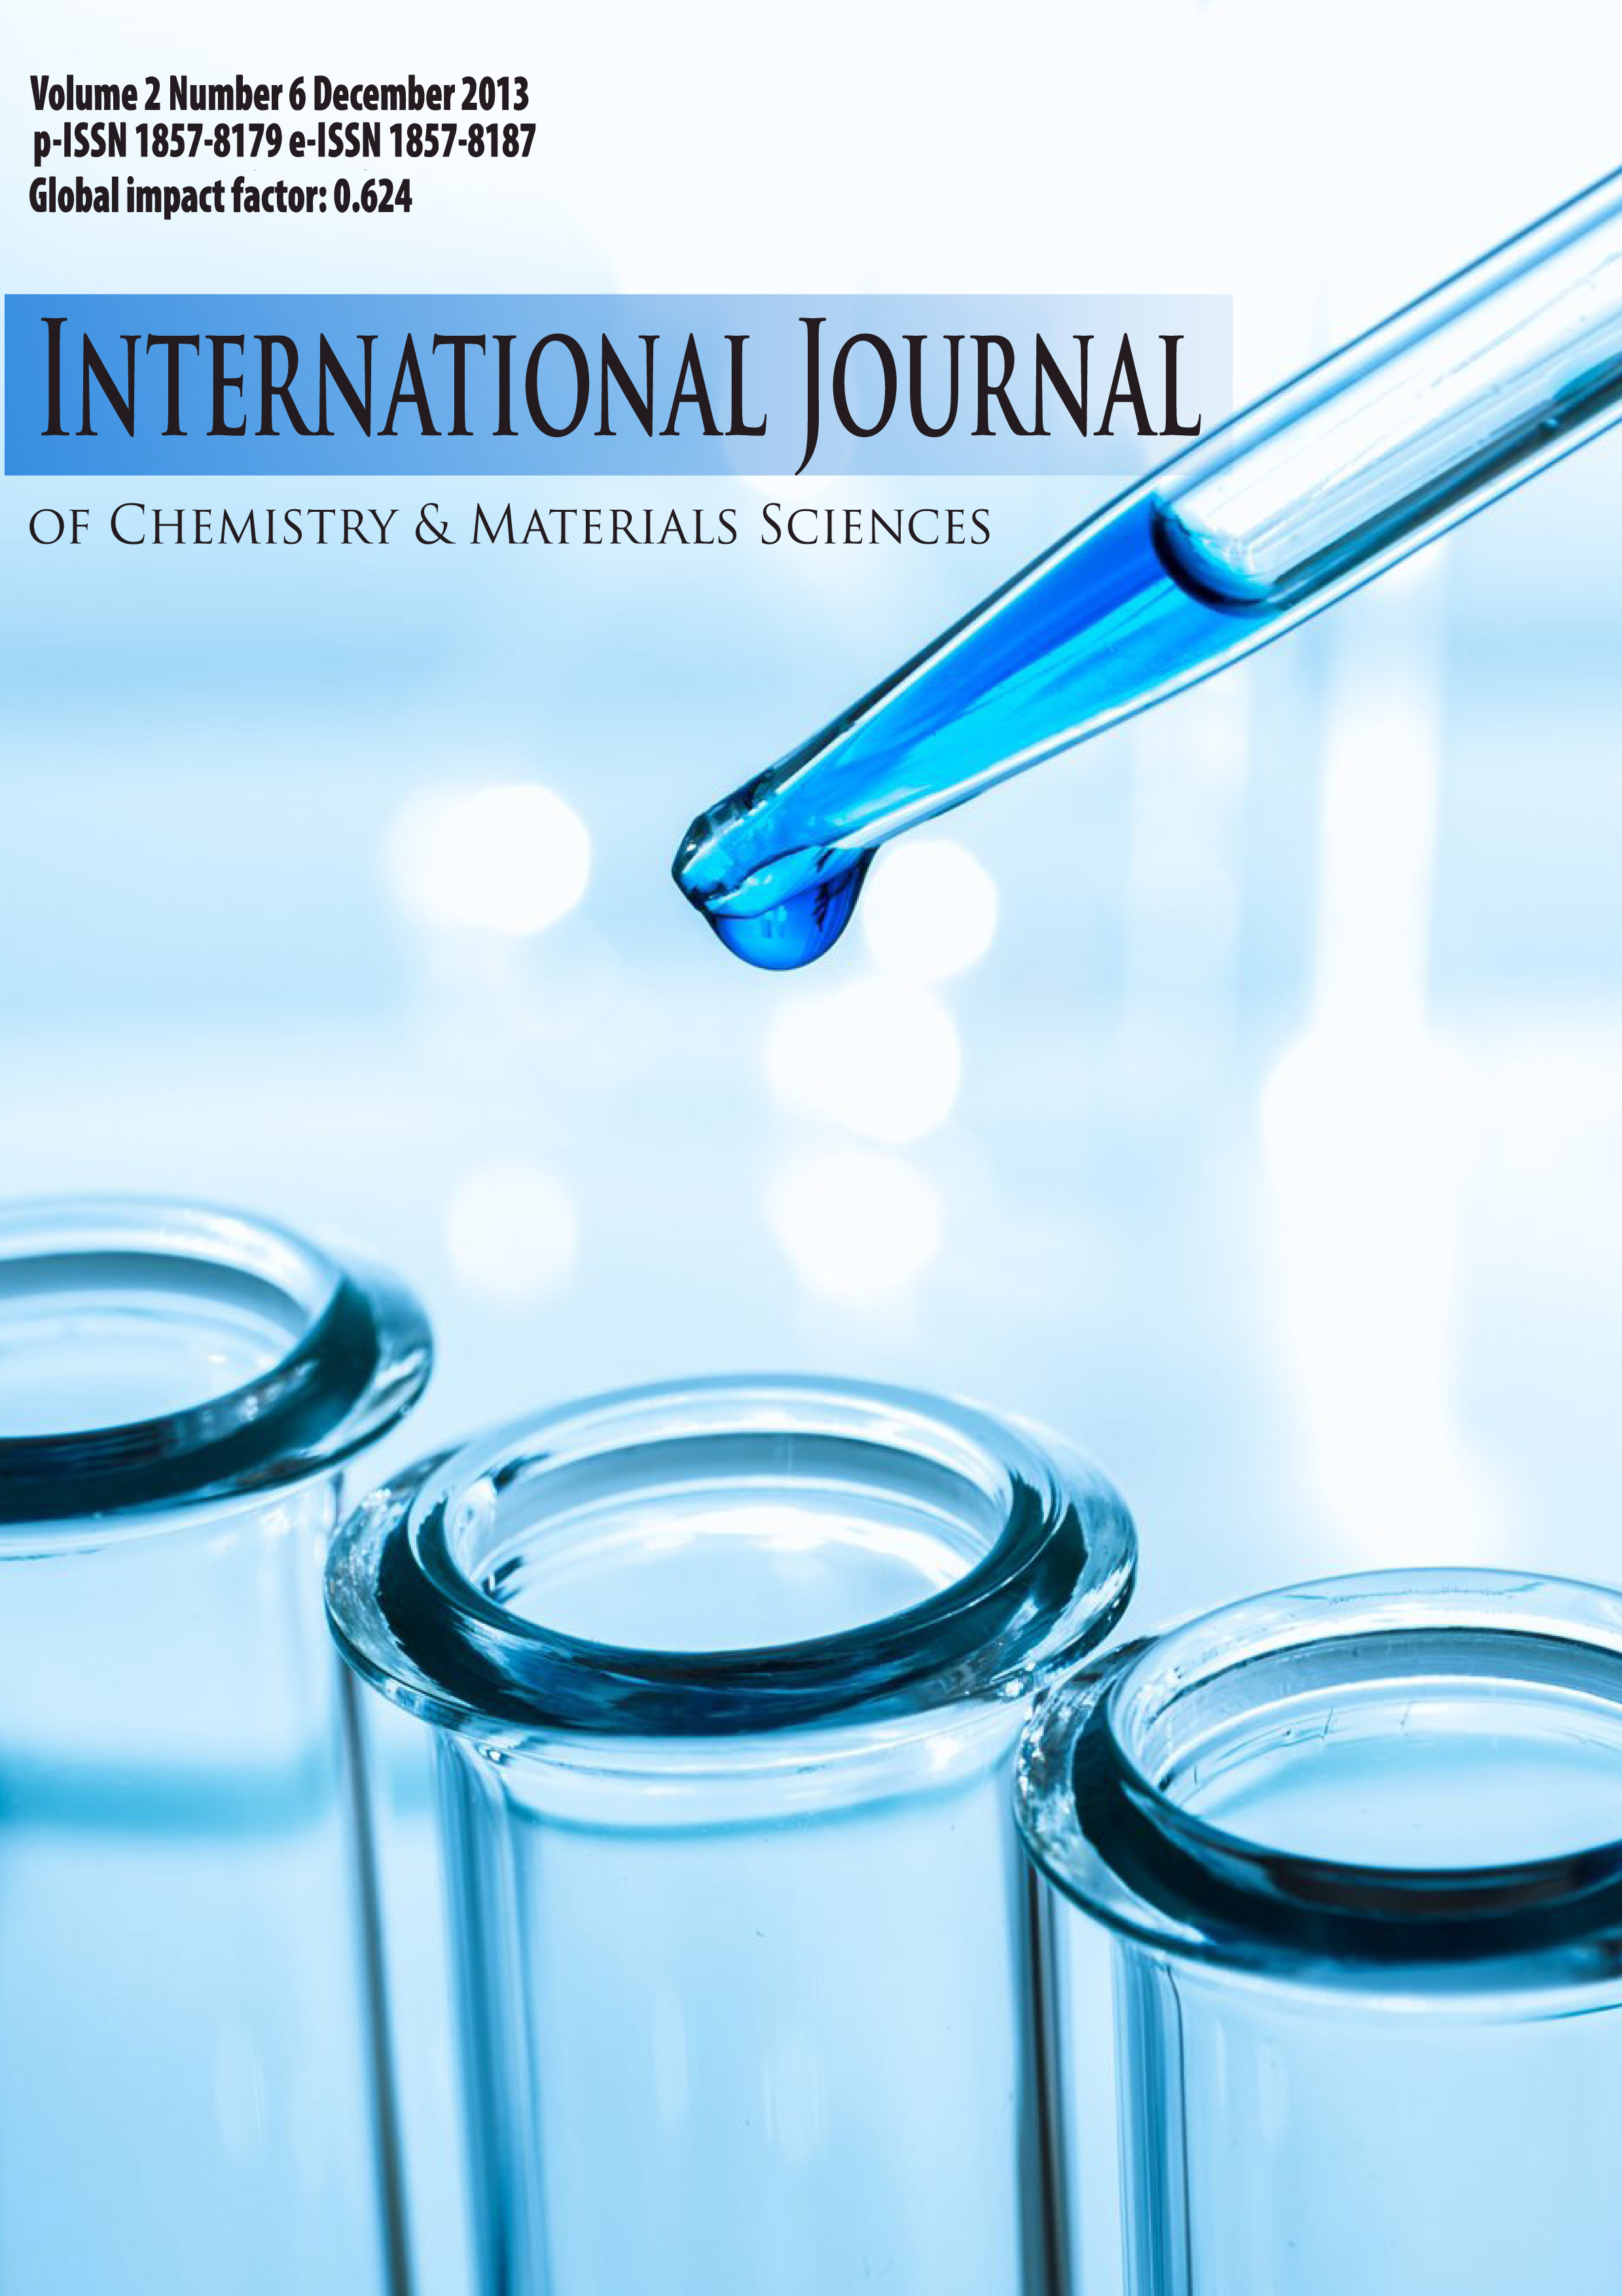 					View Vol. 2 No. 1 (2017): International Journal of Chemistry & Material Sciences (IJCMS)
				